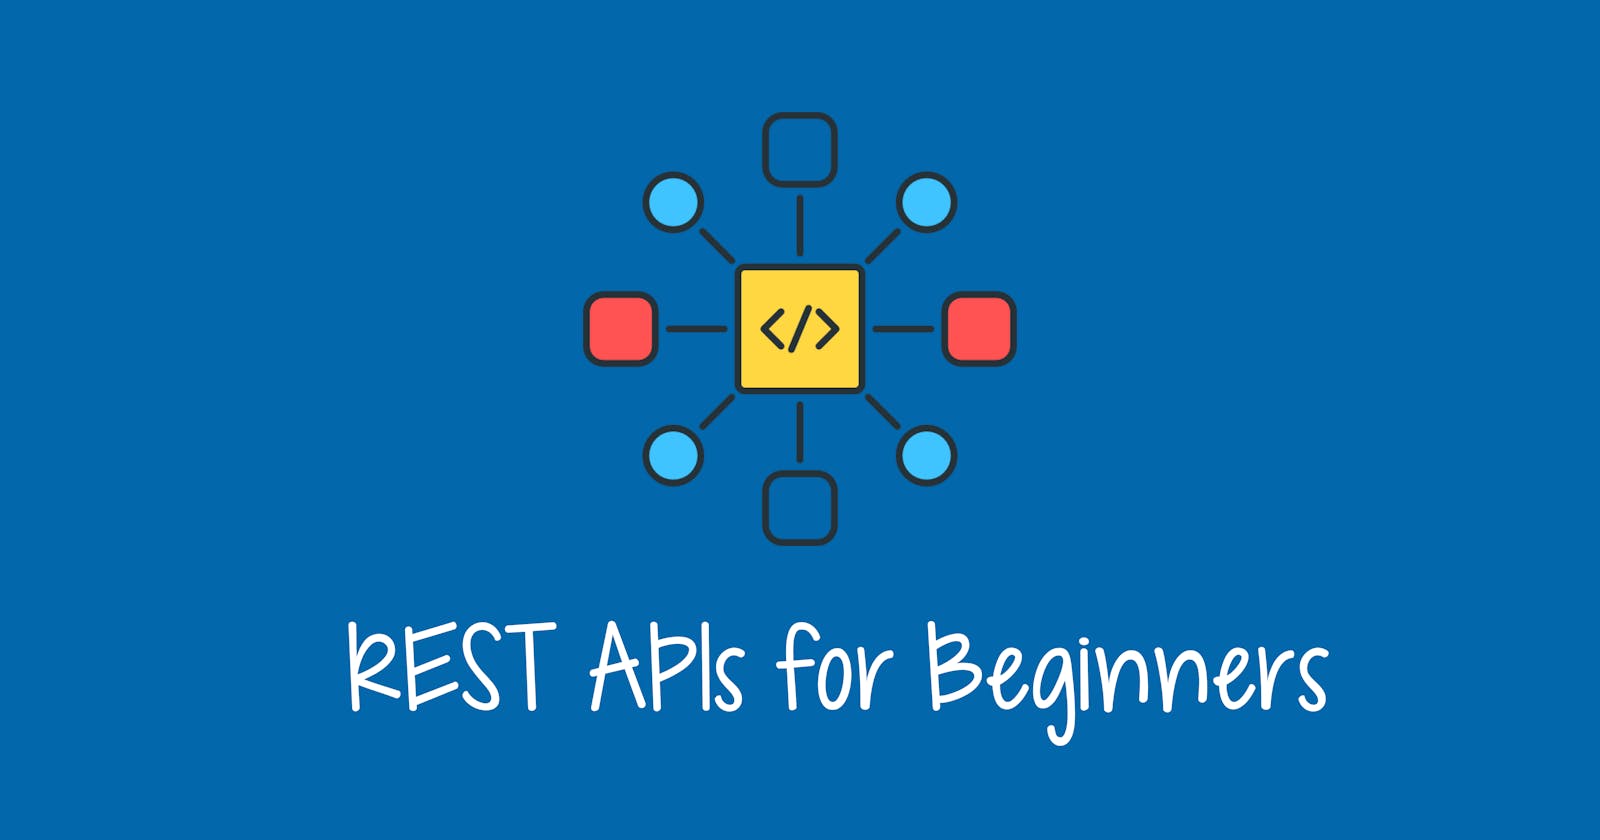 Getting Started with REST APIs